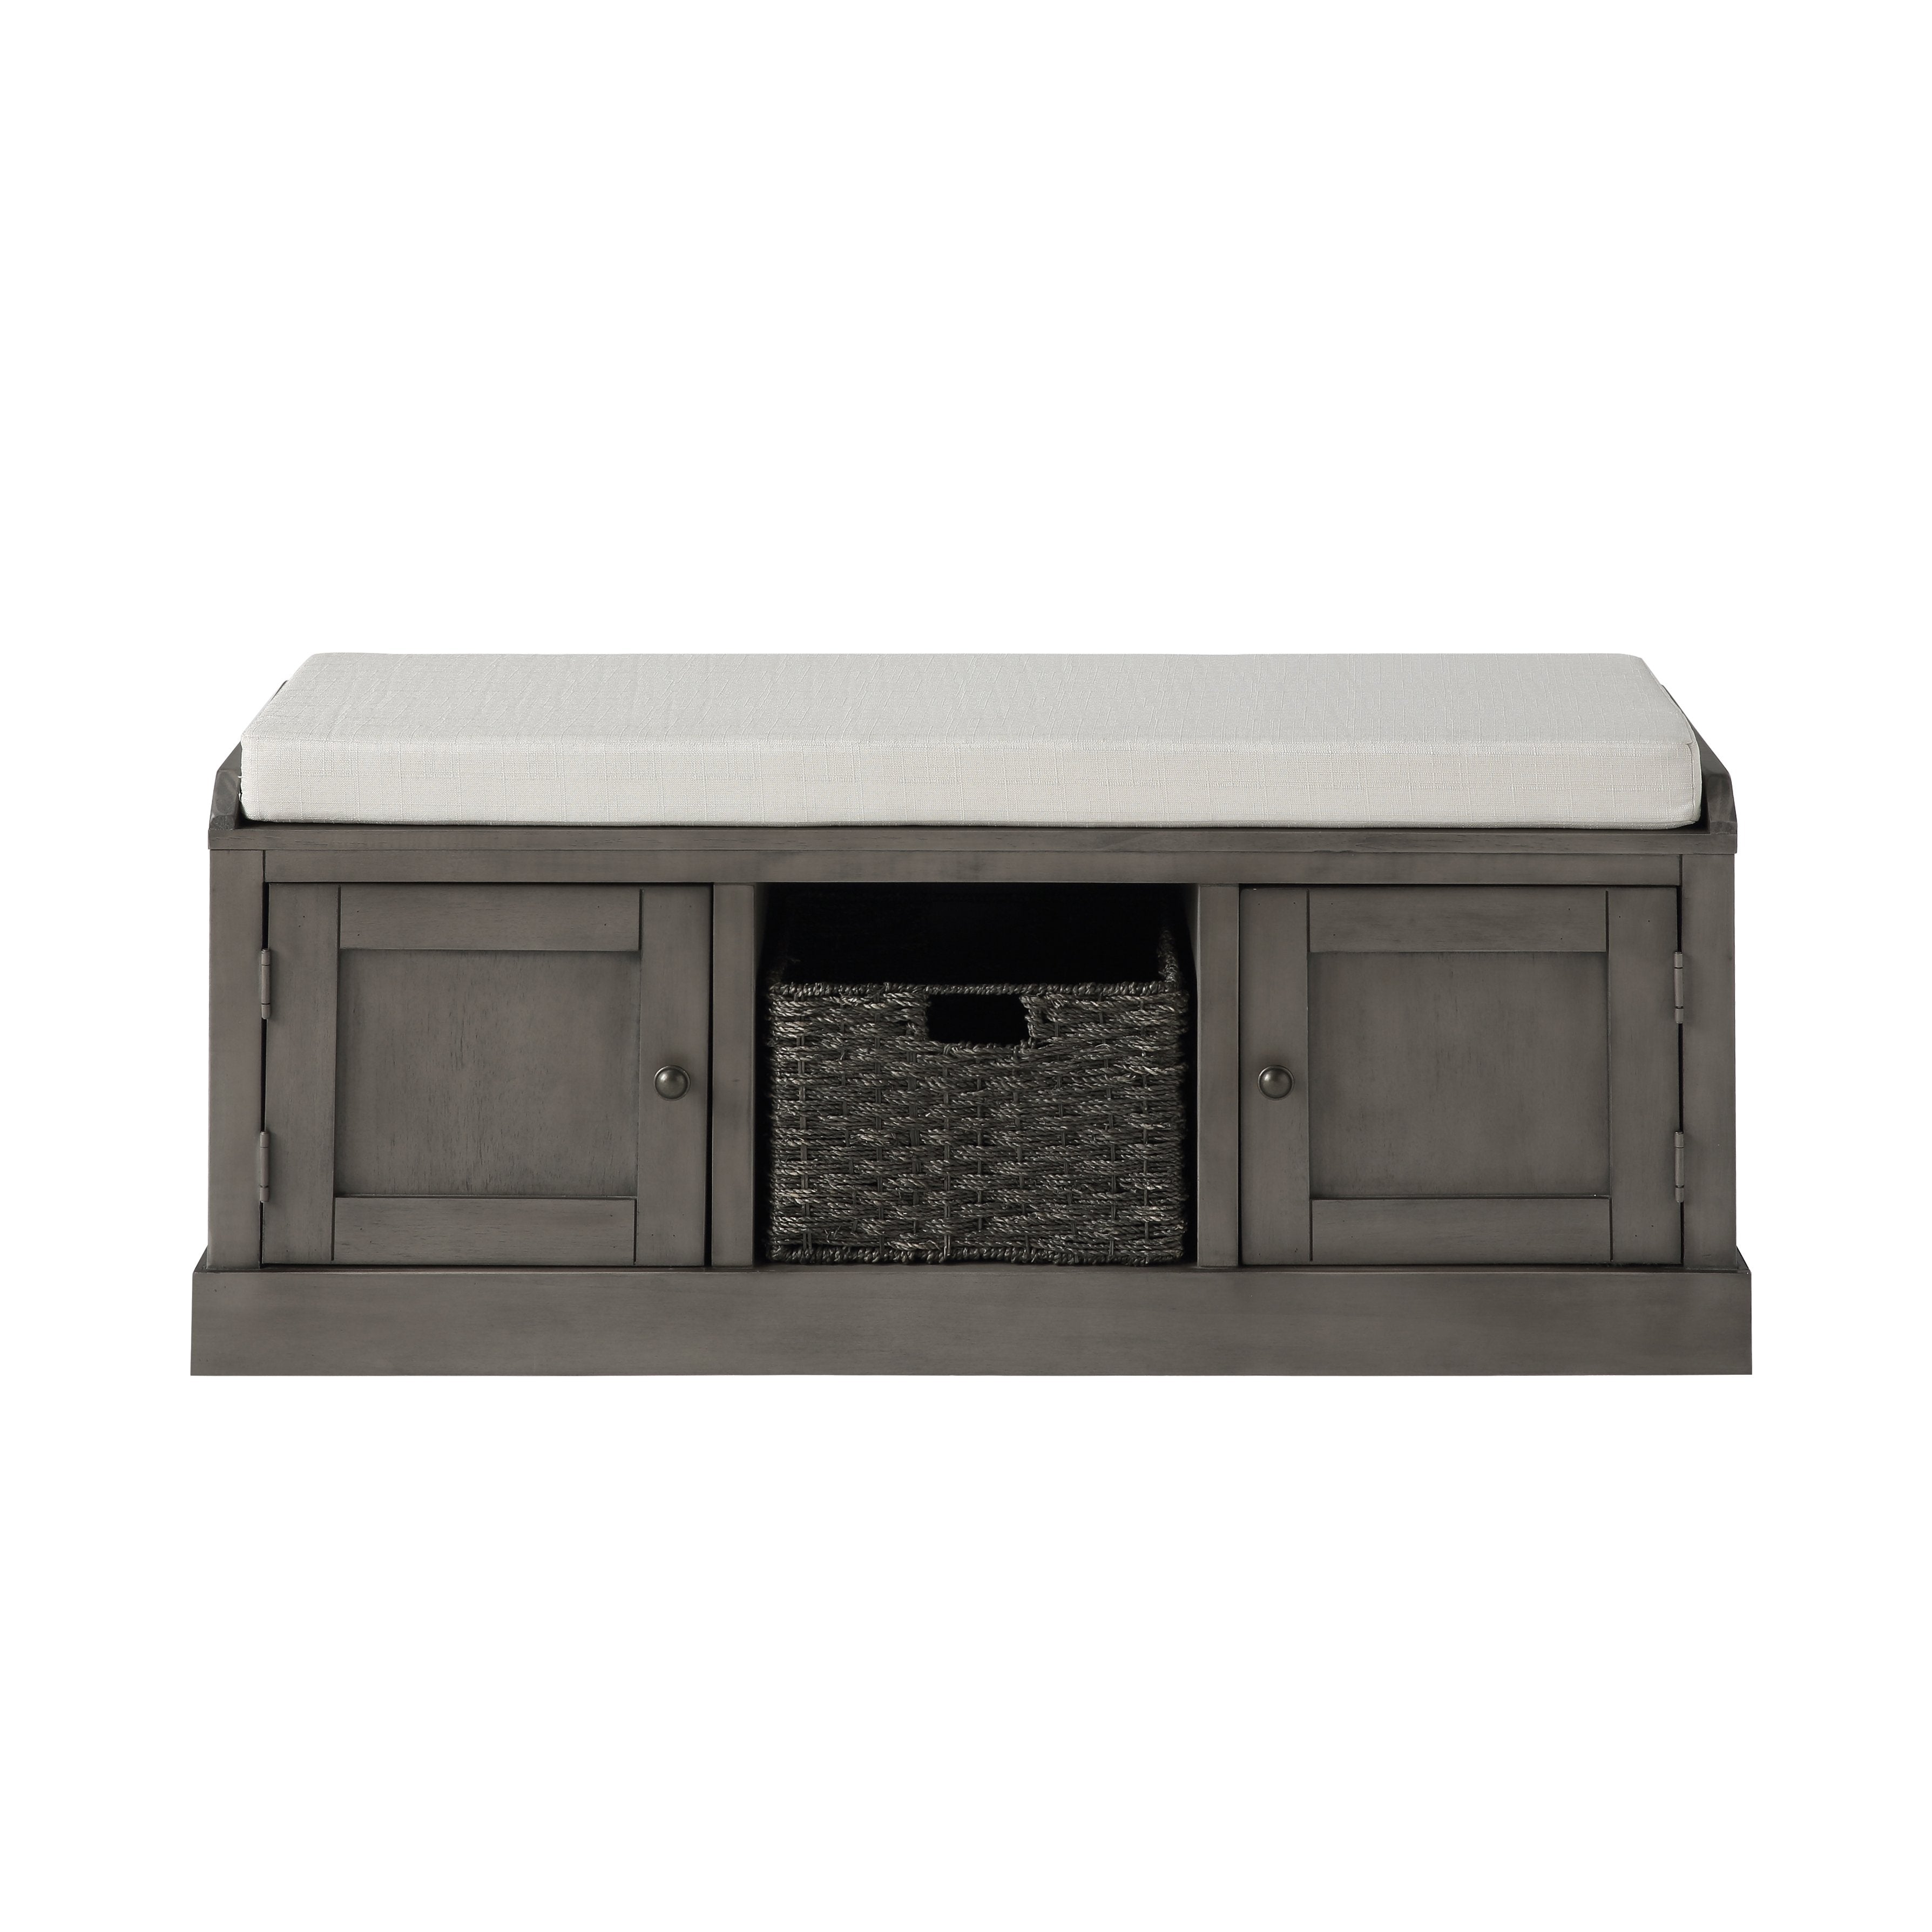 Boyel Living Homes Collection Wood Storage Bench with 2 Cabinets and 1 Basket-Boyel Living